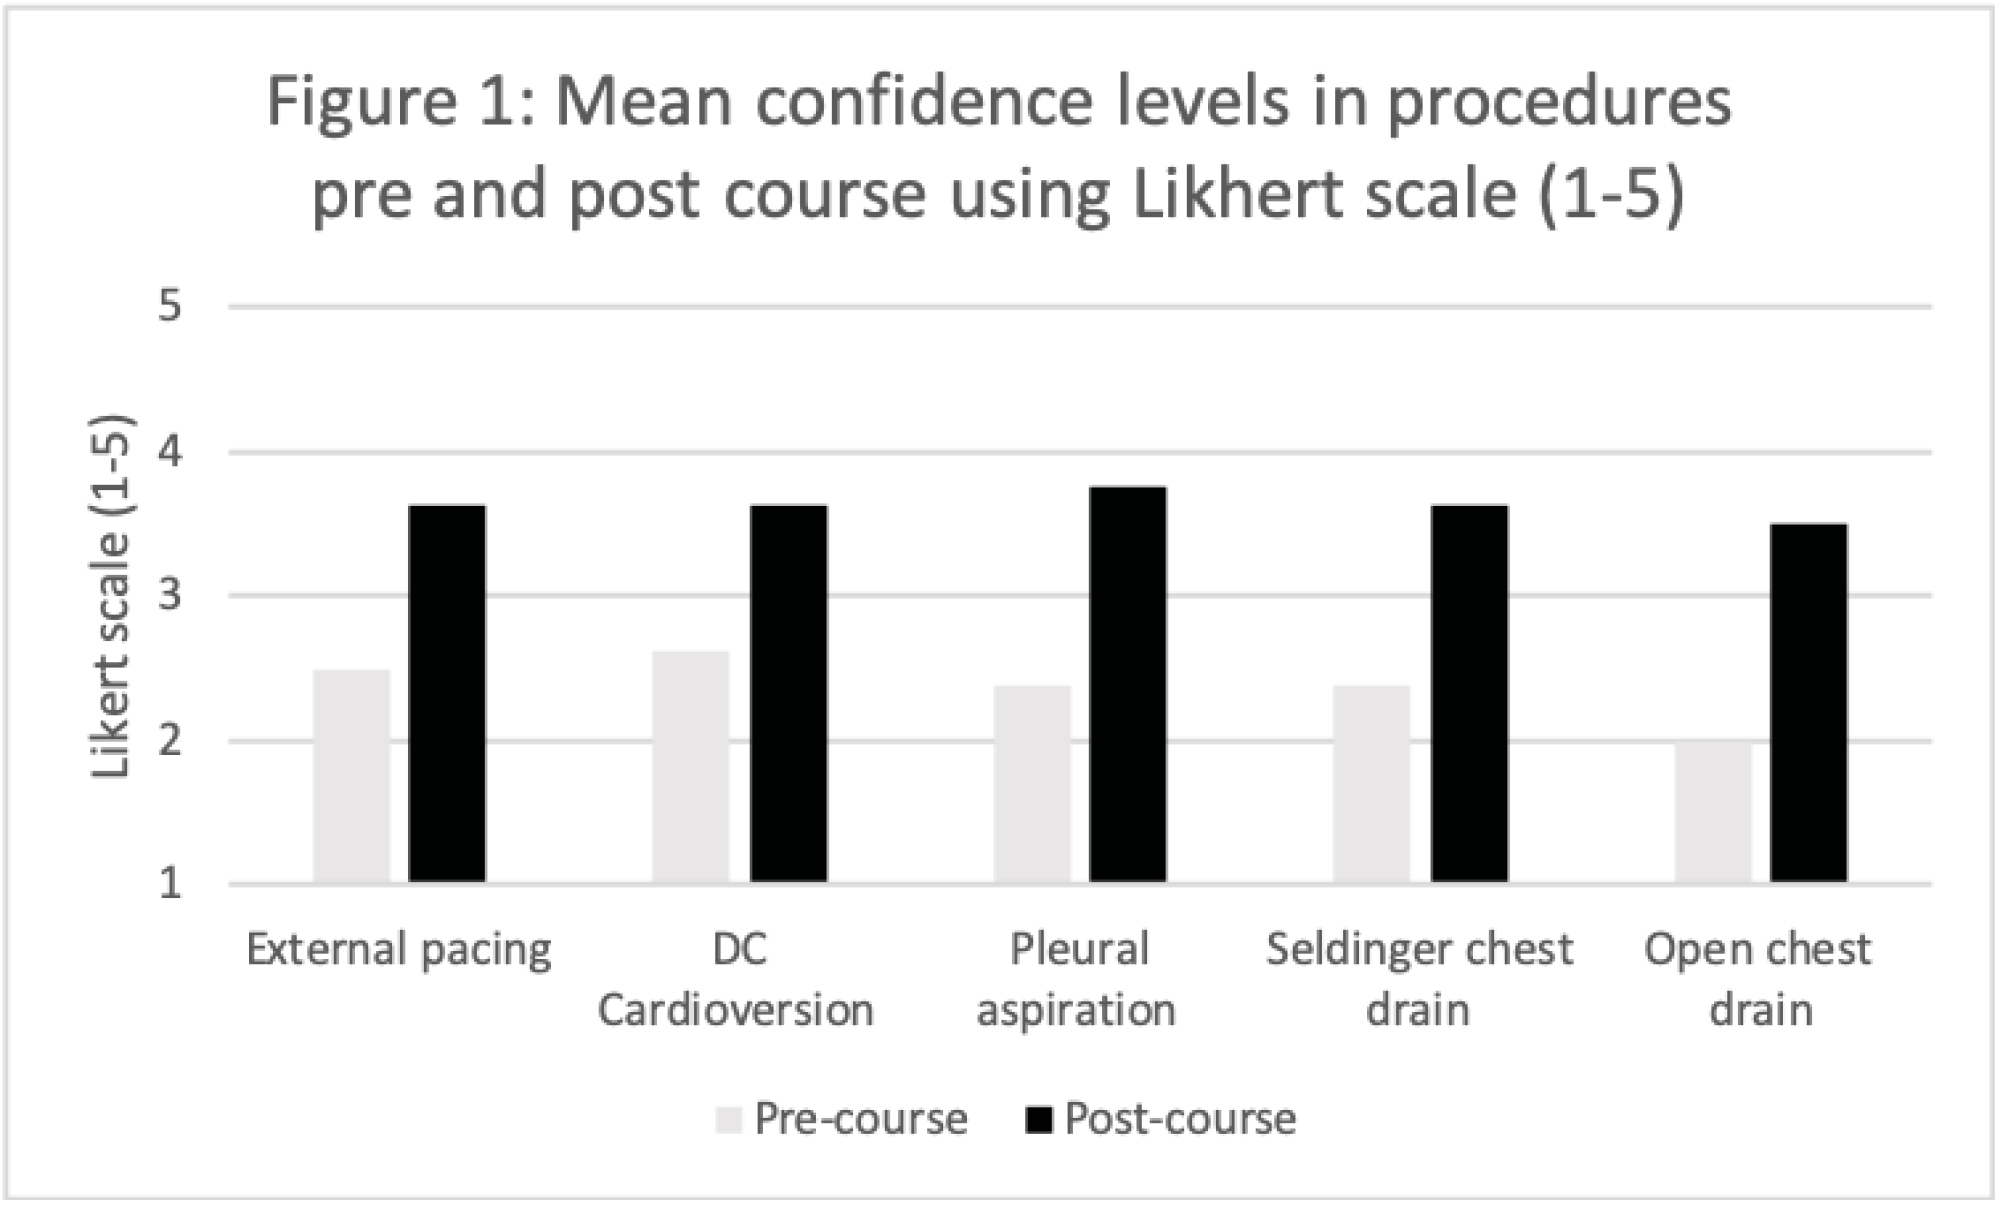 Mean confidence levels in procedures pre- and post-course using Likert scale (1–5)